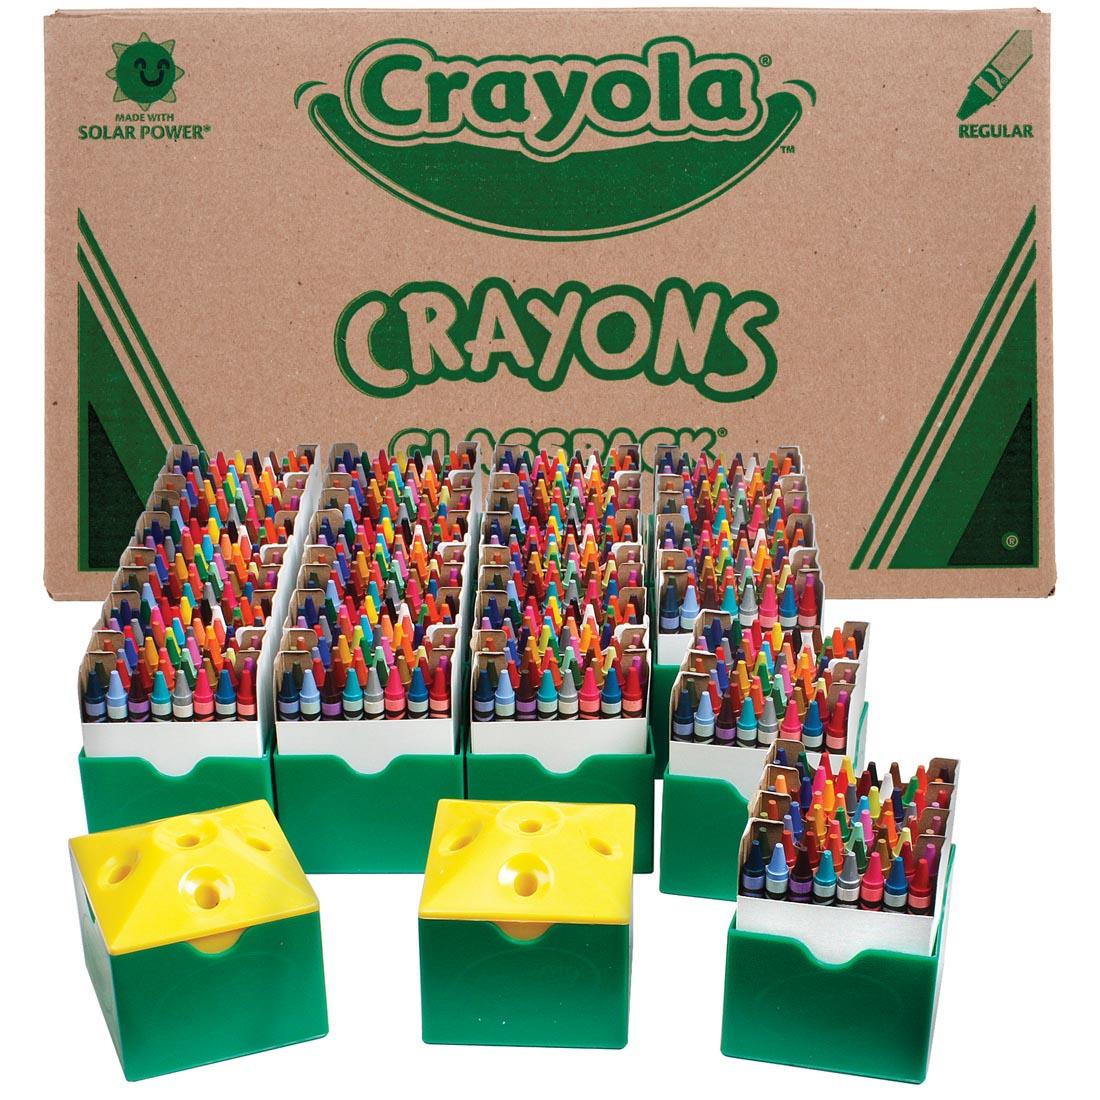 Crayola Regular Crayons 64-Color Classpack Box with the Caddies of Crayons Outside